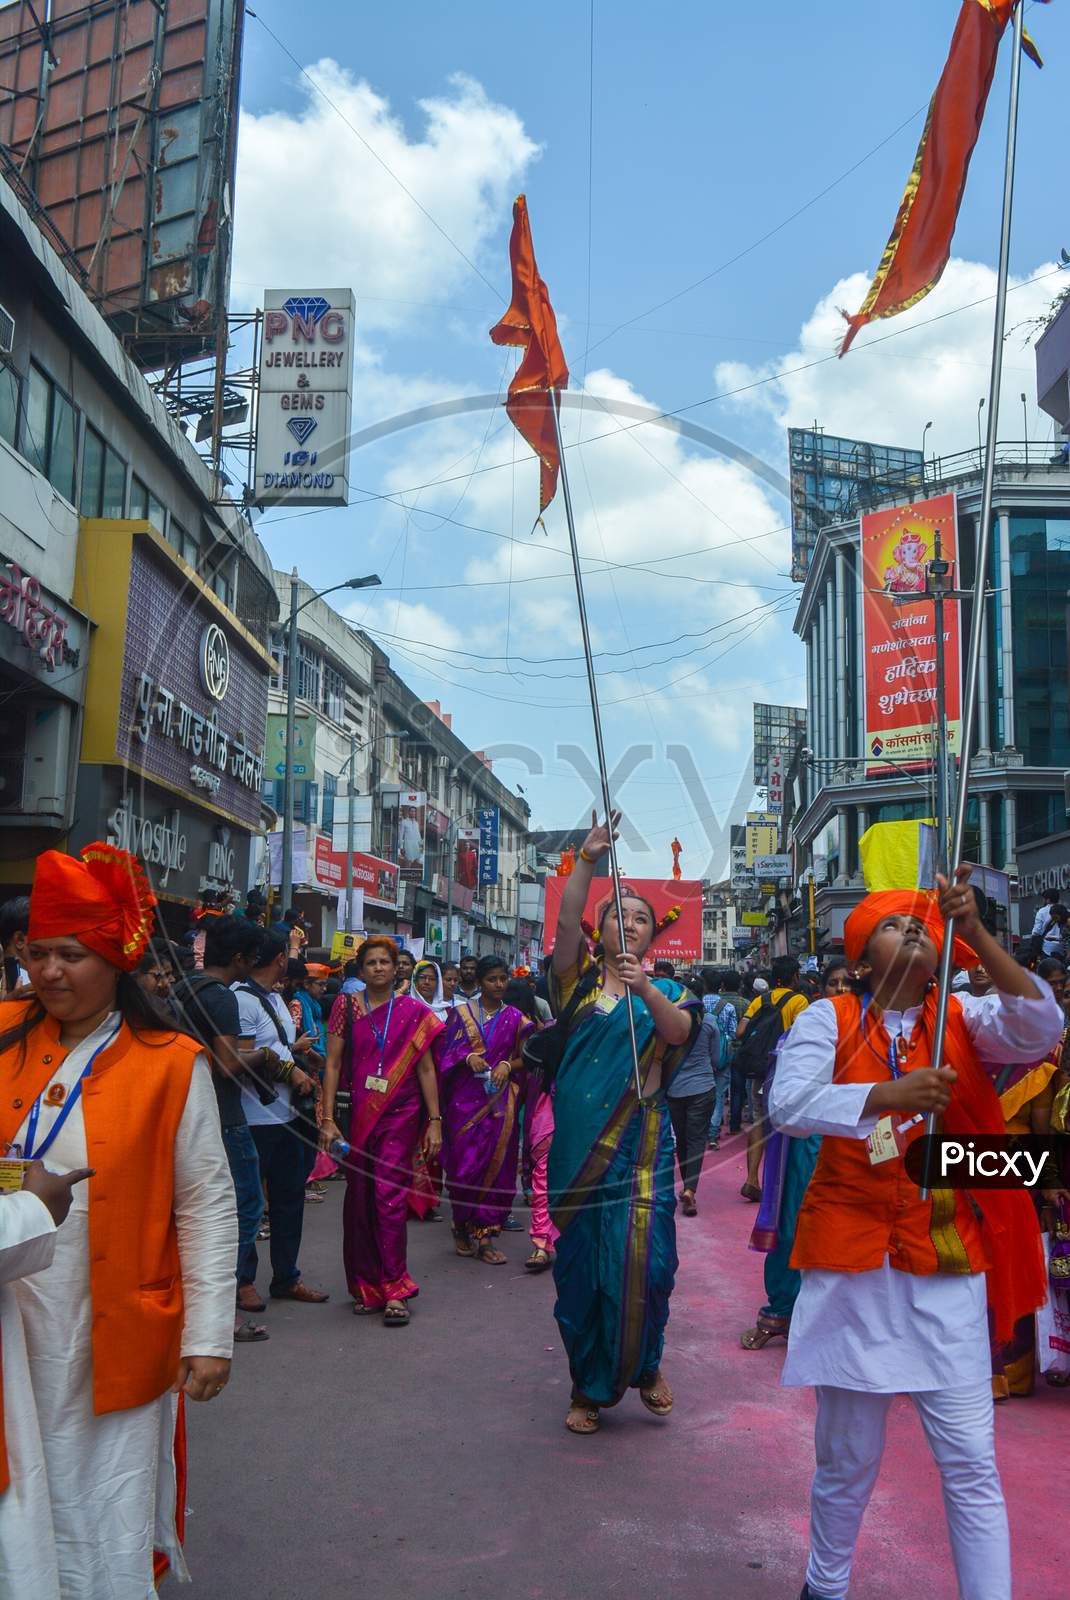 Pune, India - September 4, 2017: People Raising Orange Flags On The Occasion Of Ganpati Visarjan From Across India On The Streets Of Pune. Women And A Girl Happily Dancing With The Traditional Flags